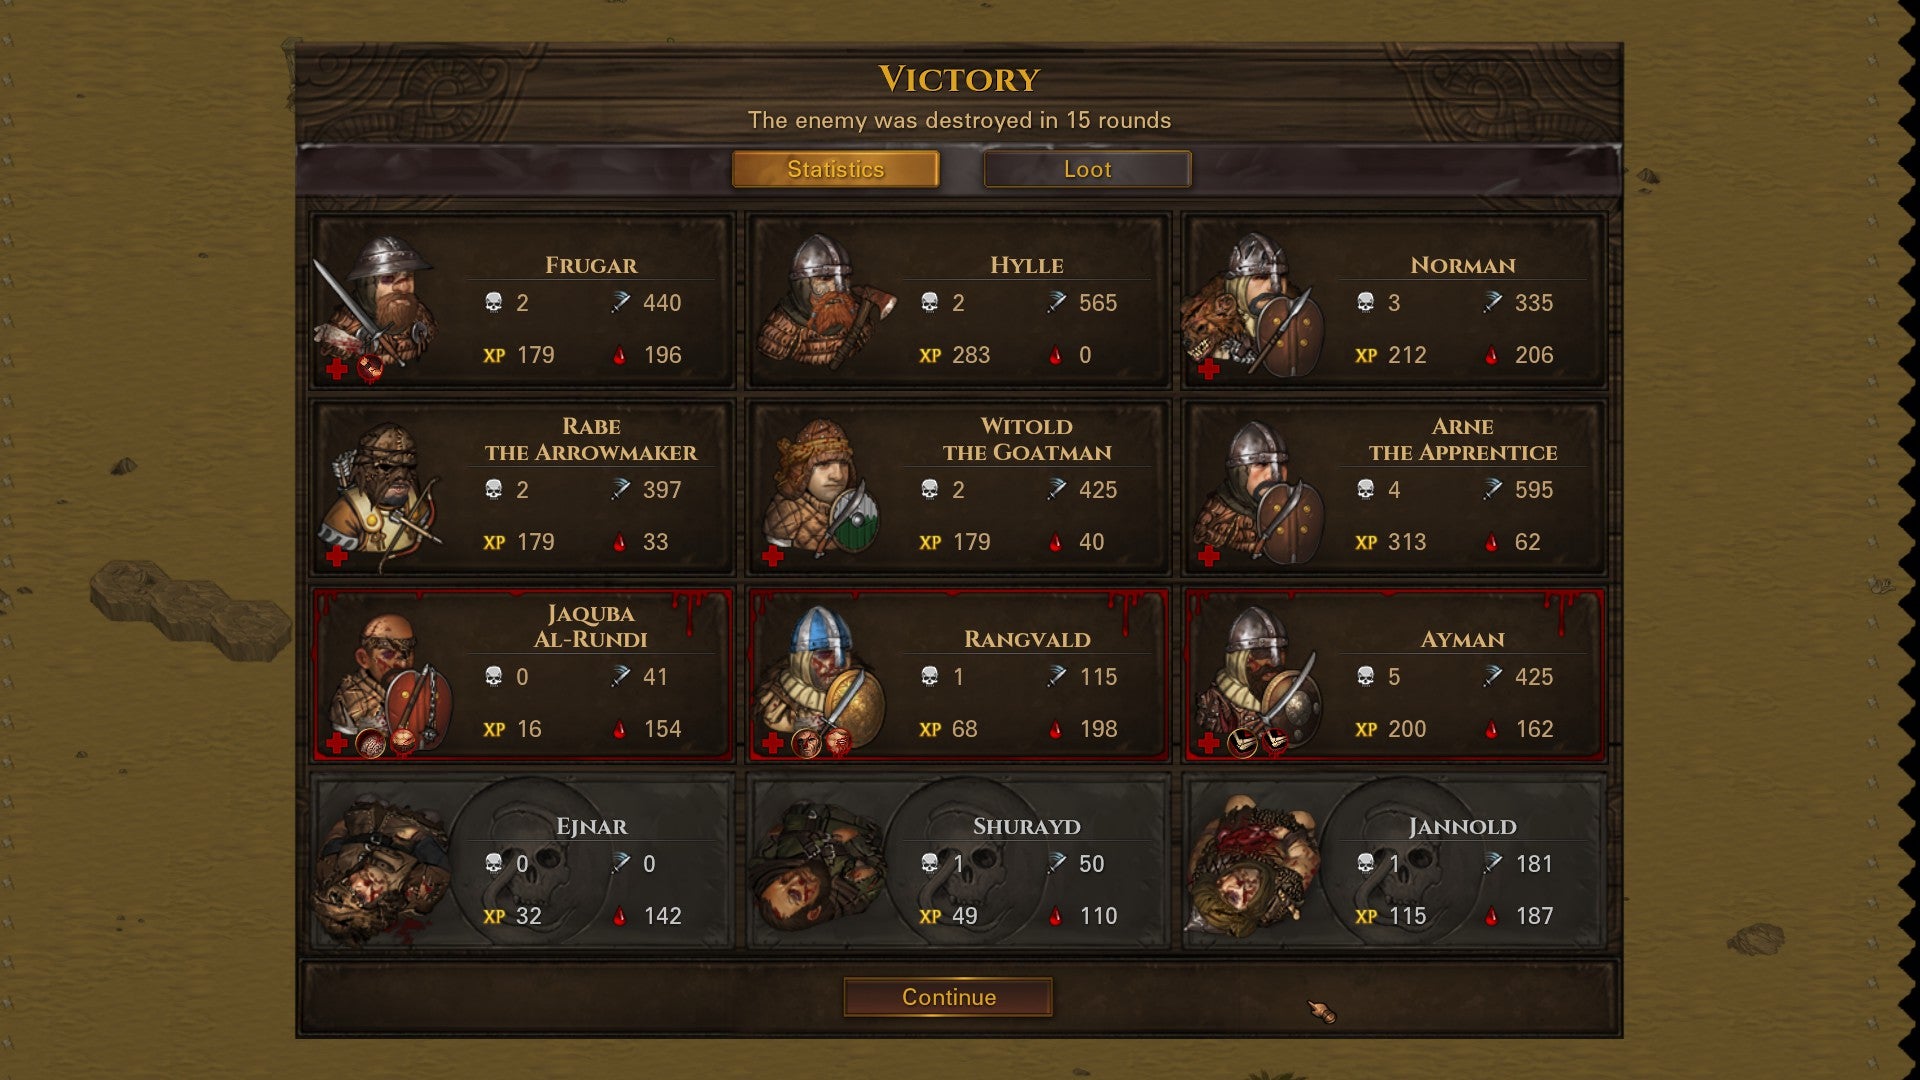 A post-battle victory screen in Battle Brothers, showing which members of the company died or were injured